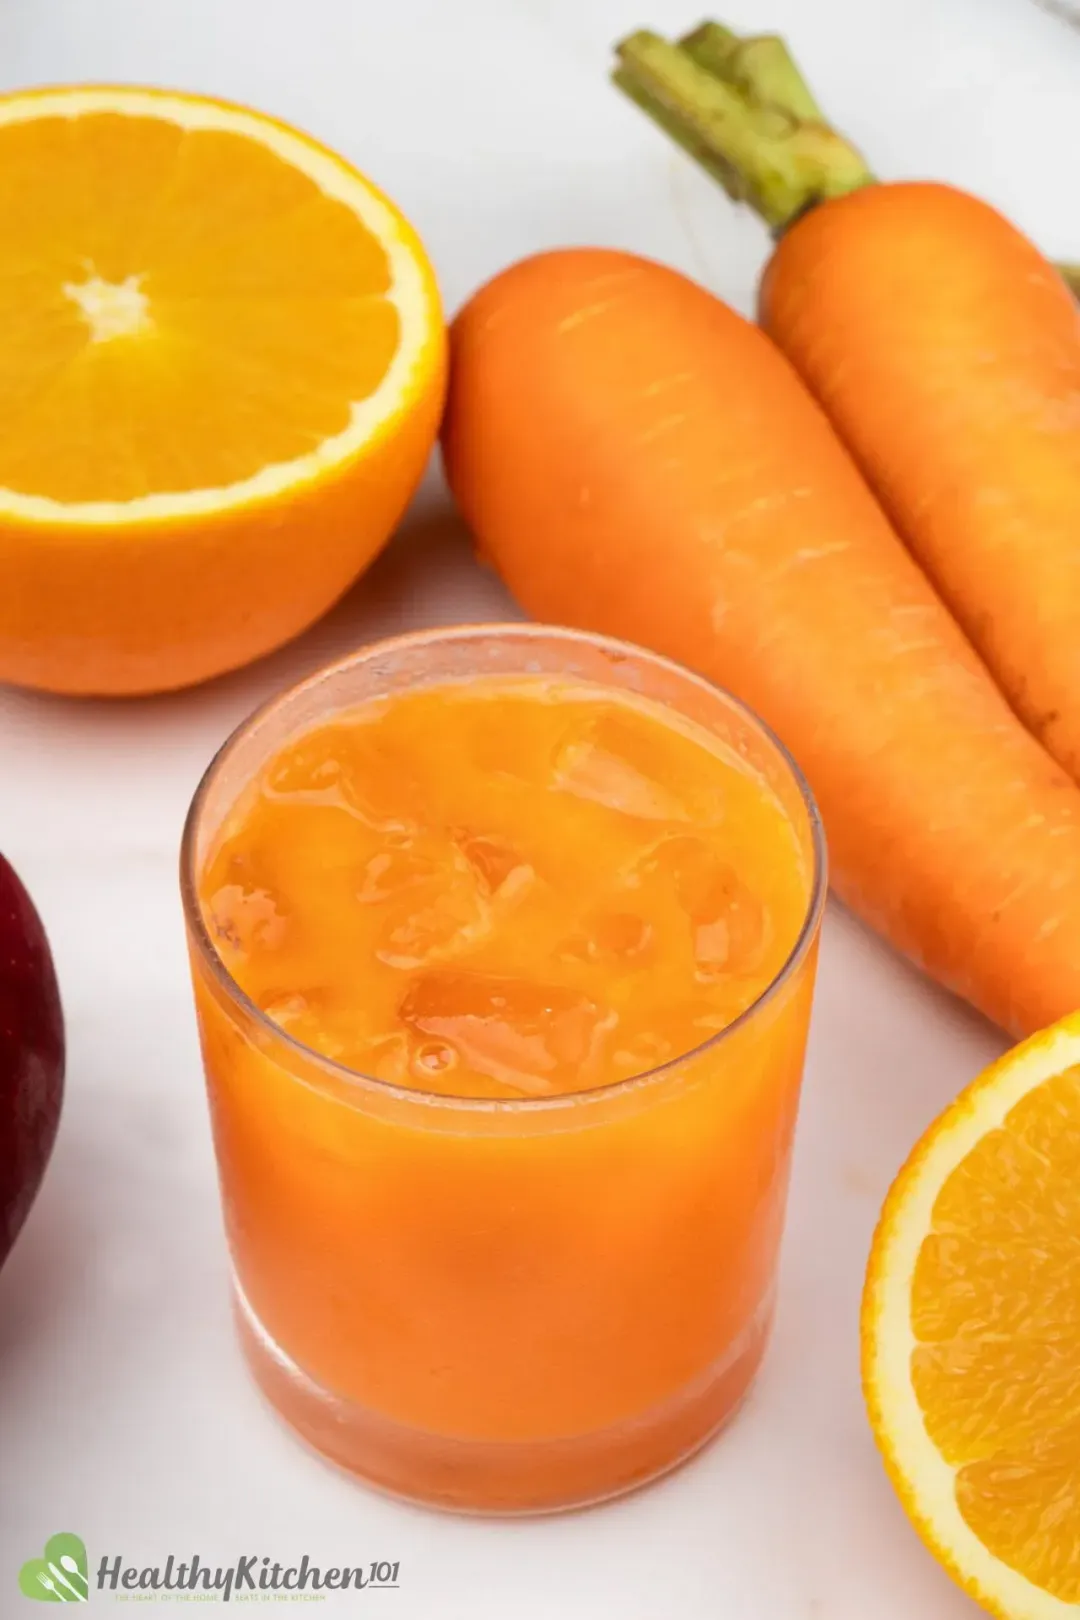 An iced glass of carrot drink next to orange halves and whole carrots